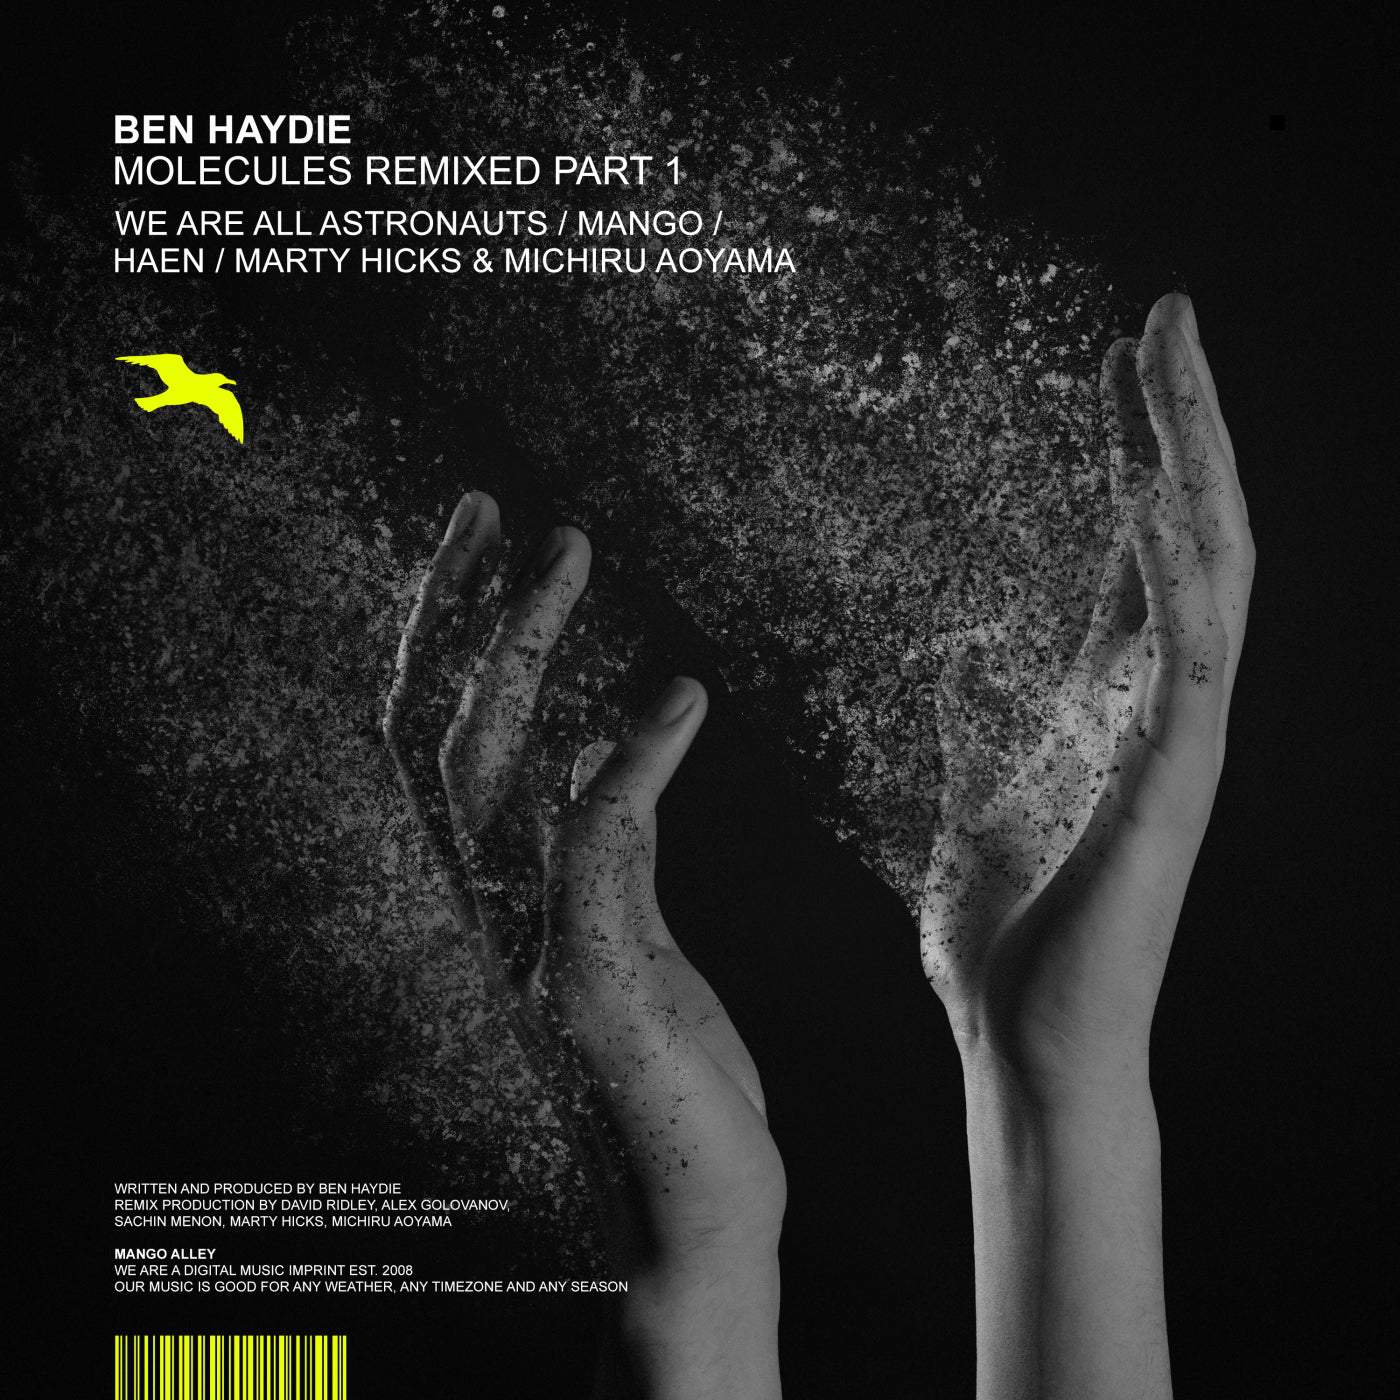 image cover: Ben Haydie - Molecules Remixed, Pt. 1 / ALLEY194A